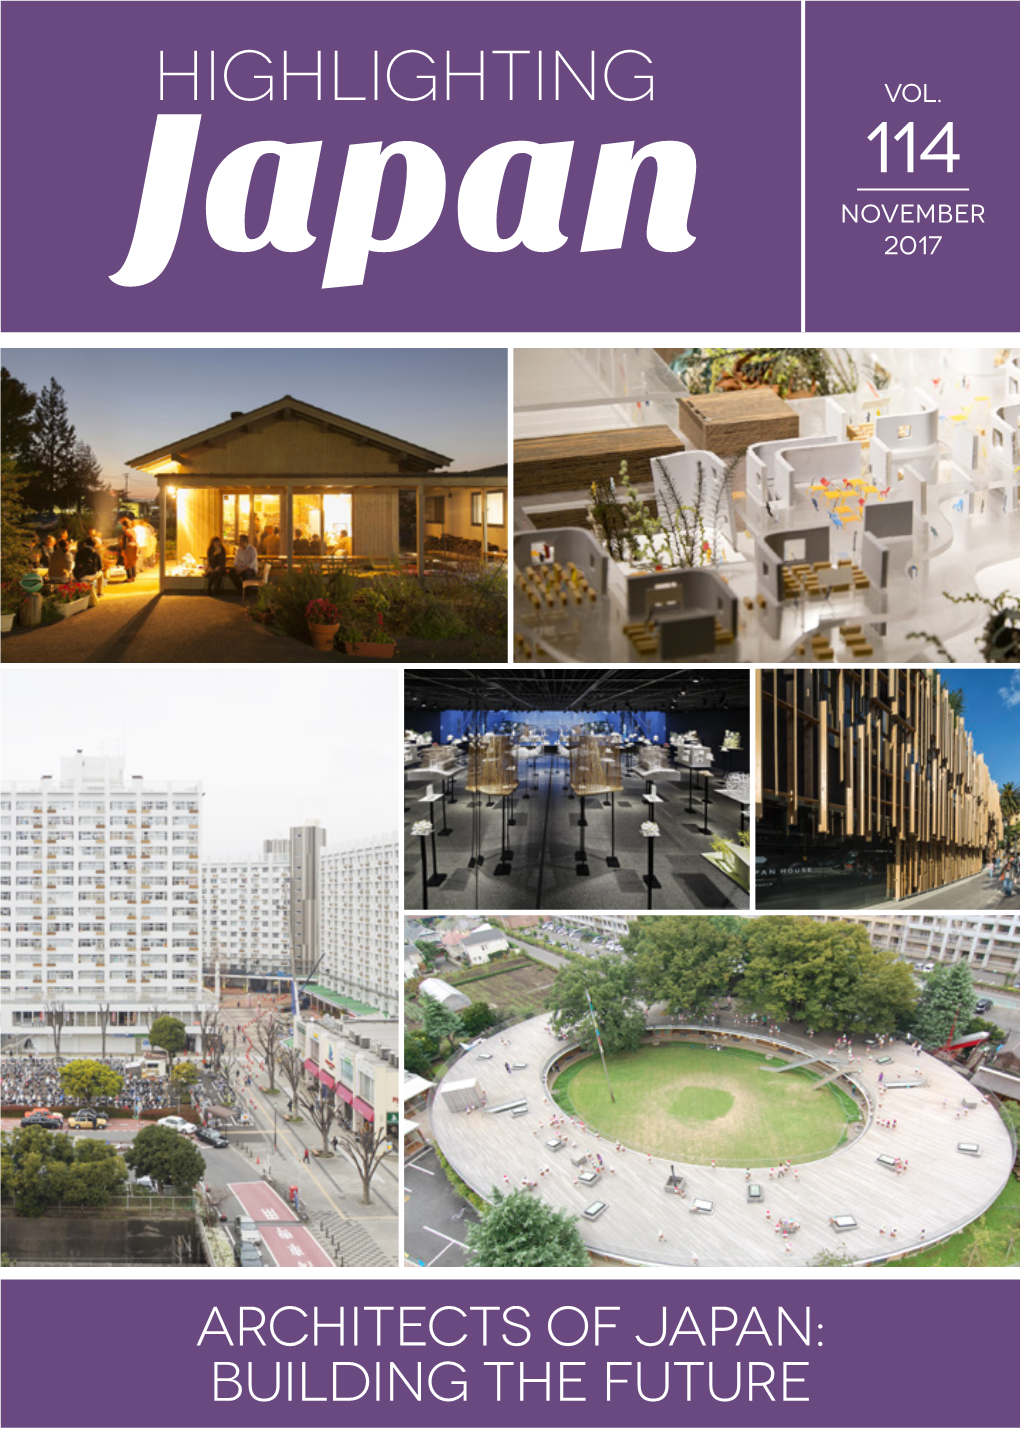 Architects of Japan: Building the Future